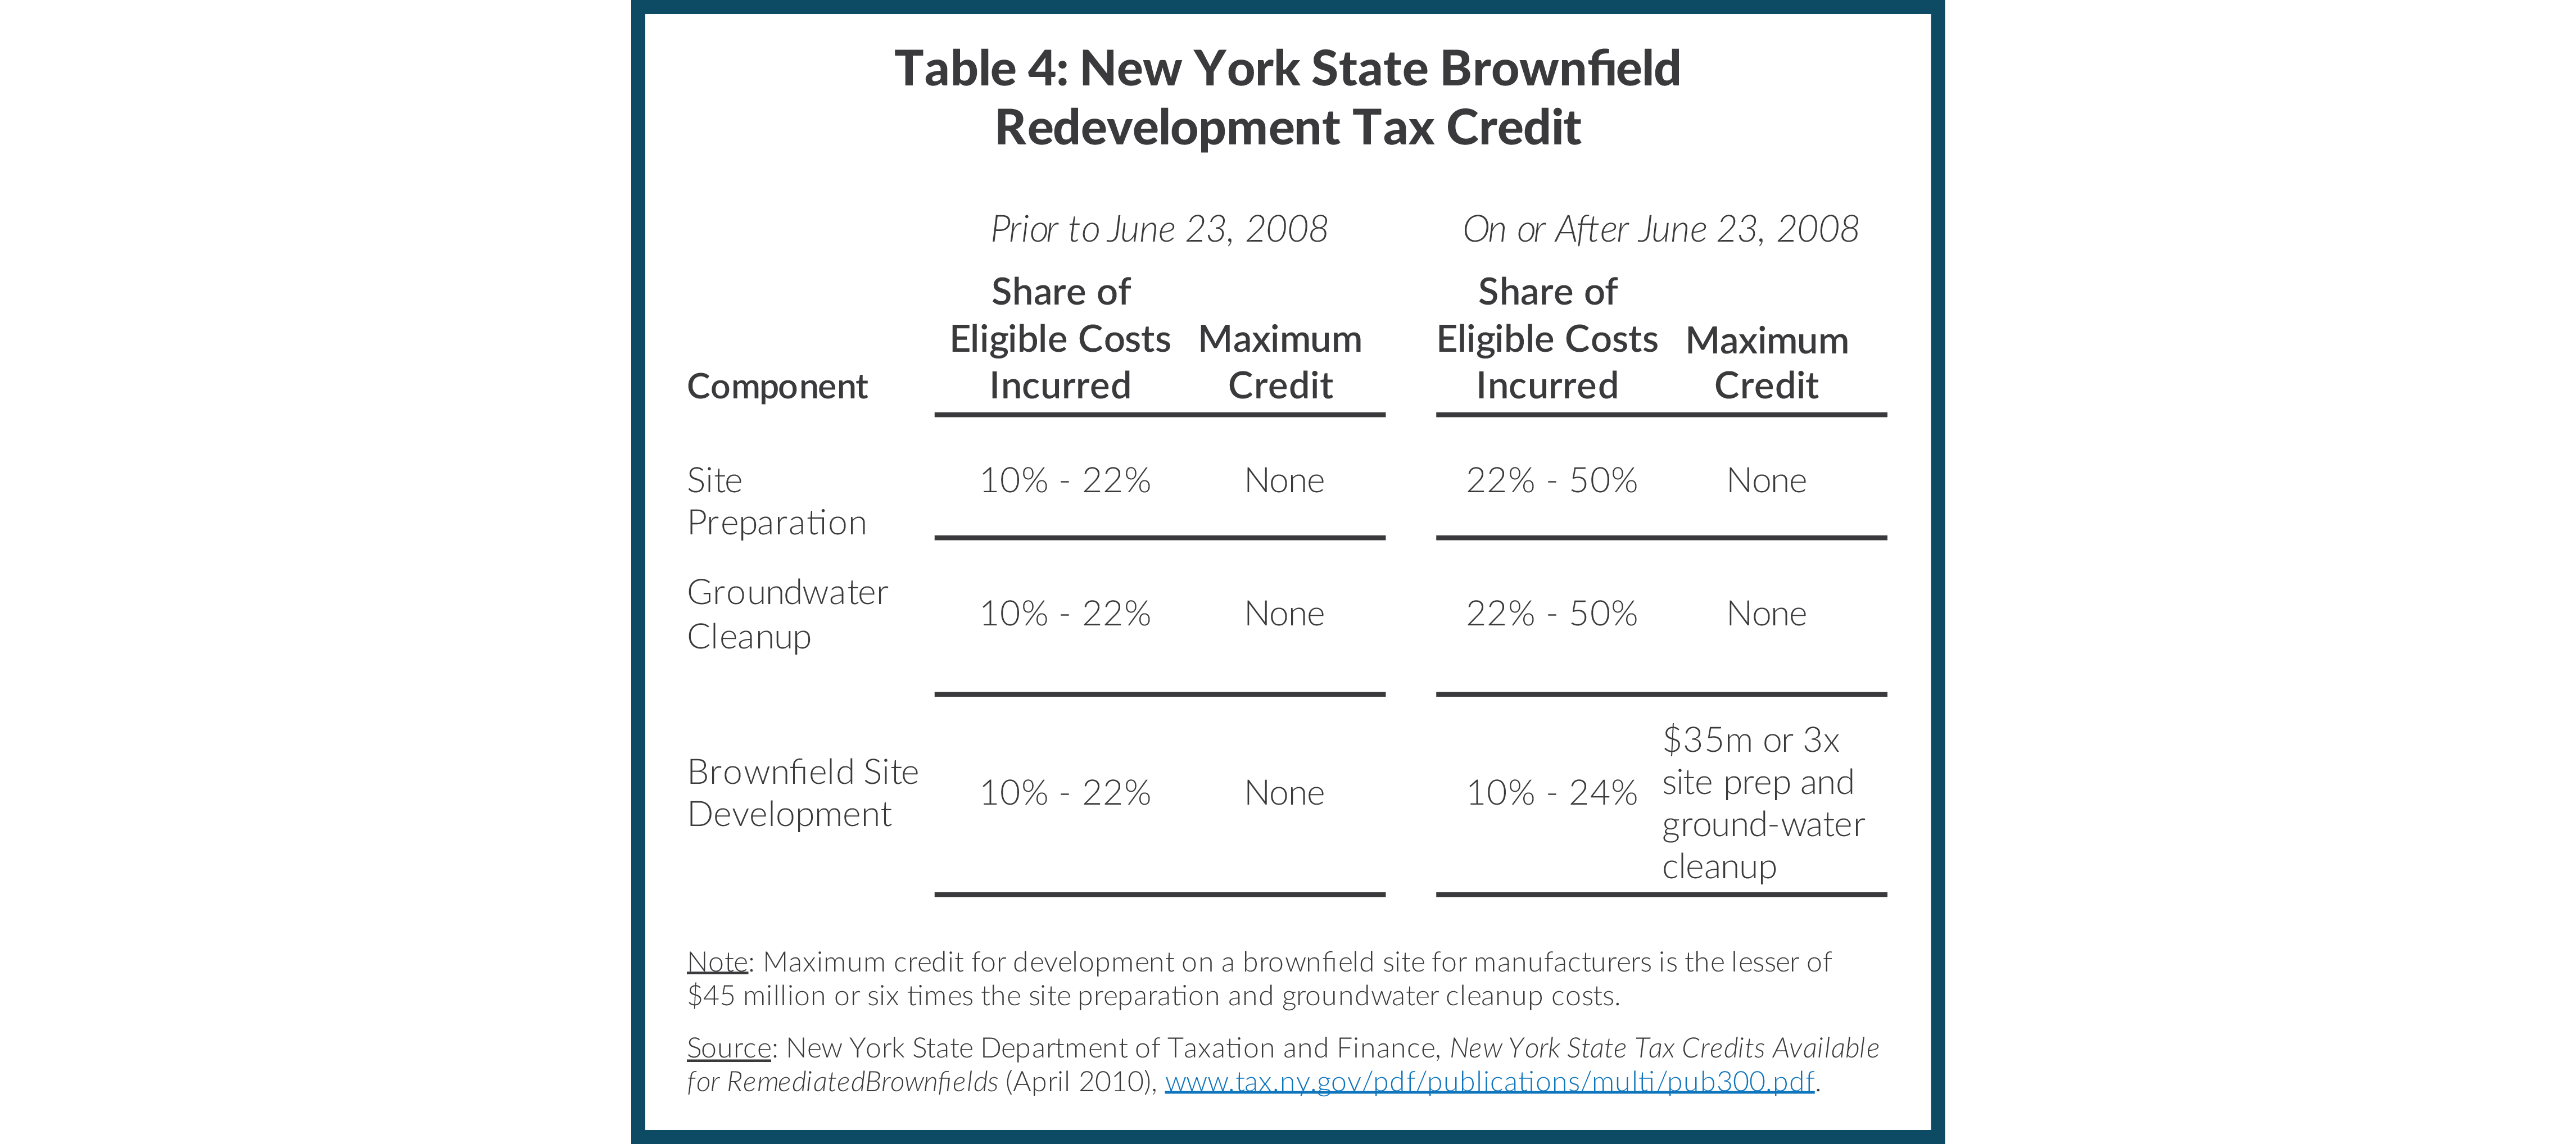 Table 4: New York State Brownfield Redevelopment Tax Credit